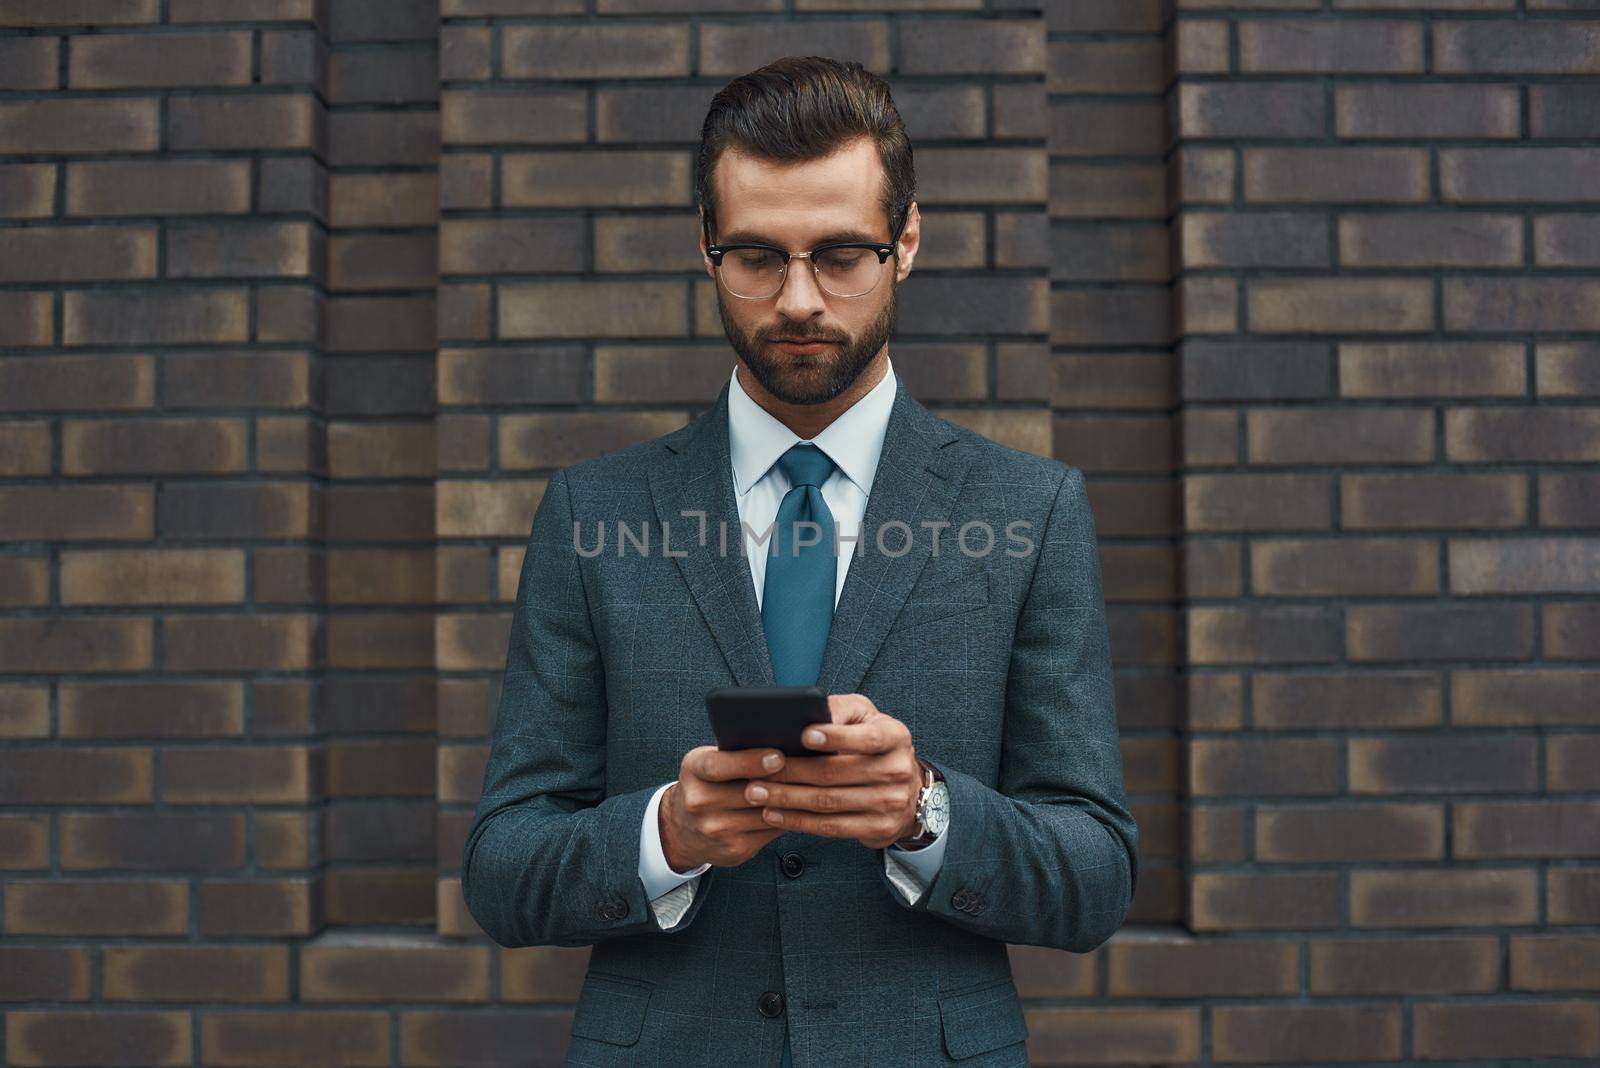 Business message. Handsome businessman in formal wear and eyeglasses using smart phone while standing against brick wall. Business concept. Digital concept